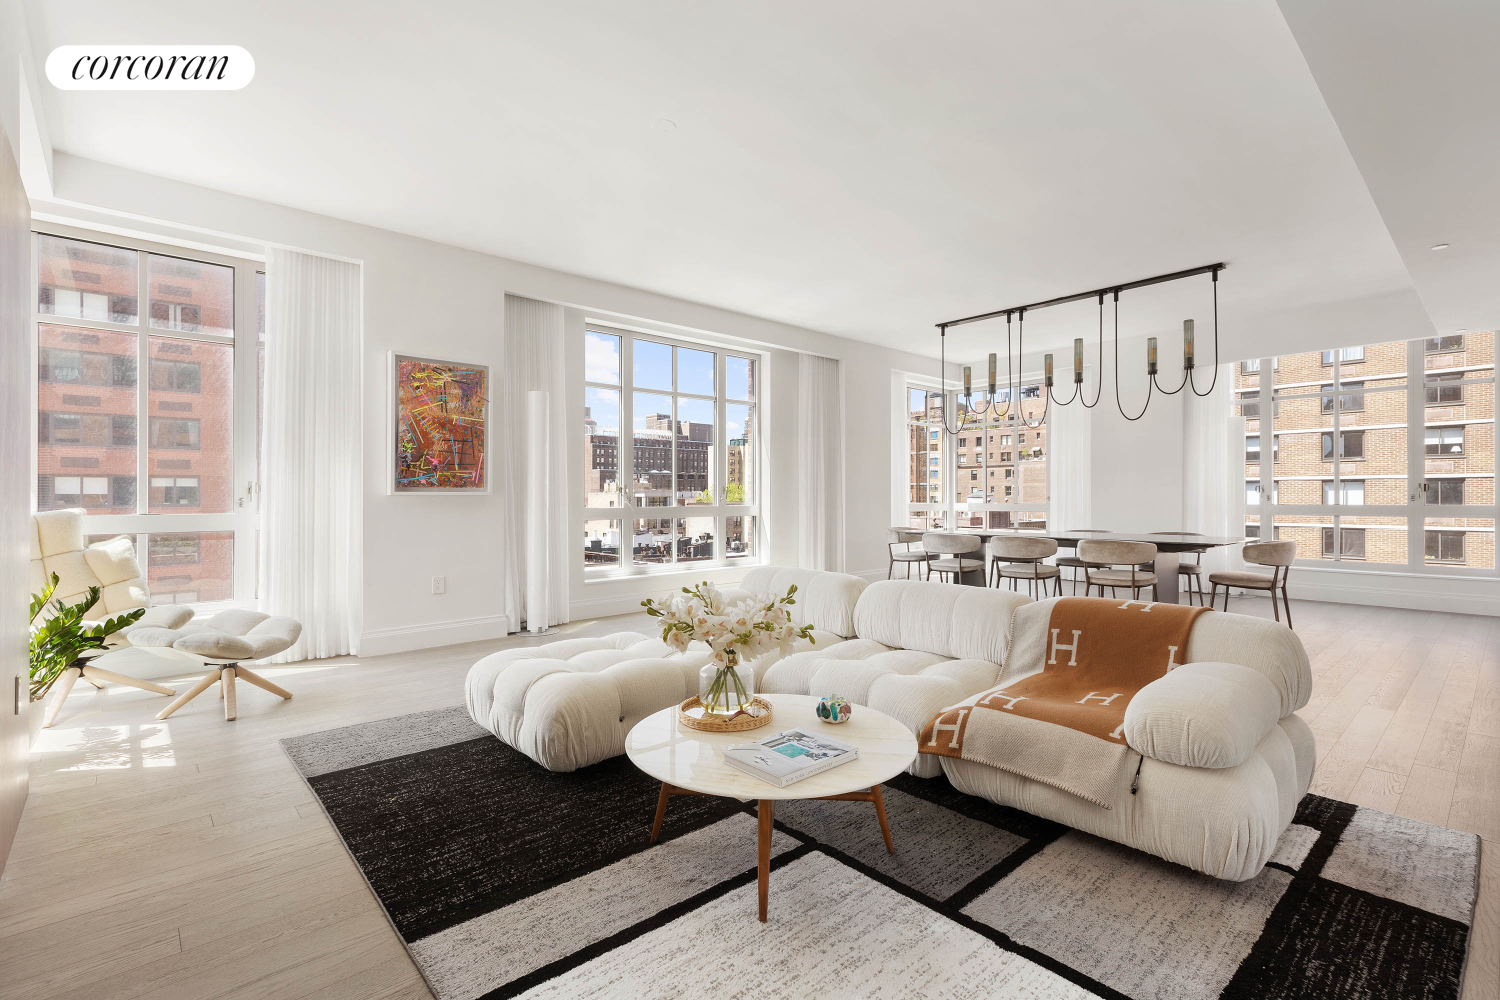 200 East 95th Street 9A, Yorkville, Upper East Side, NYC - 5 Bedrooms  
4.5 Bathrooms  
8 Rooms - 